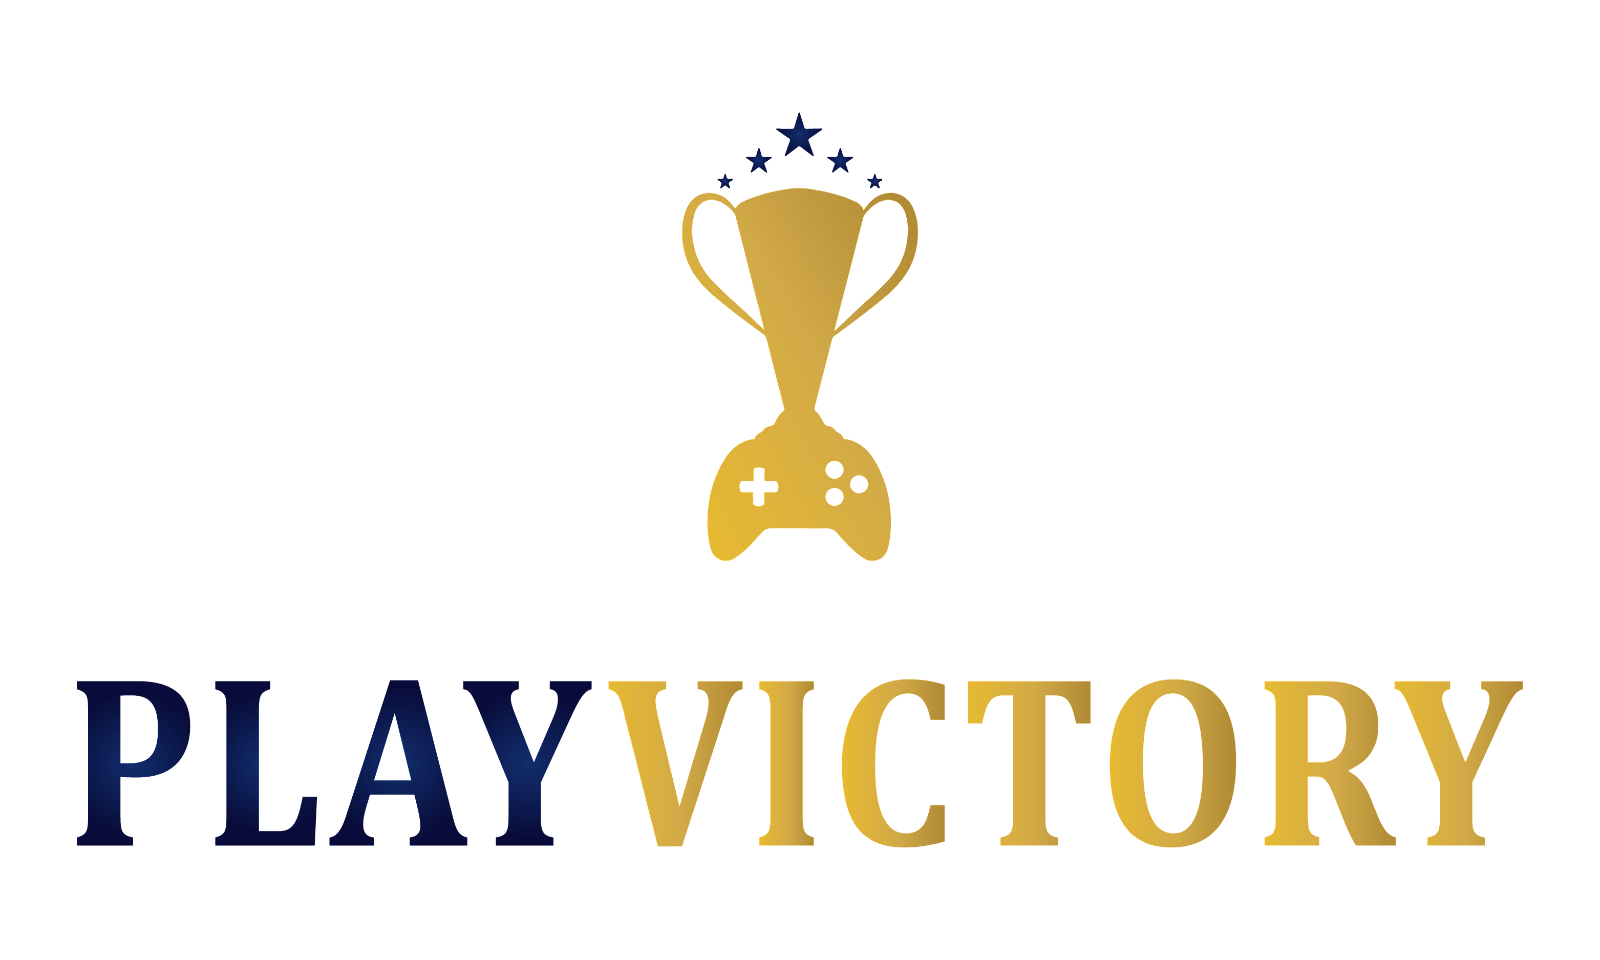 PlayVictory.com - Creative brandable domain for sale